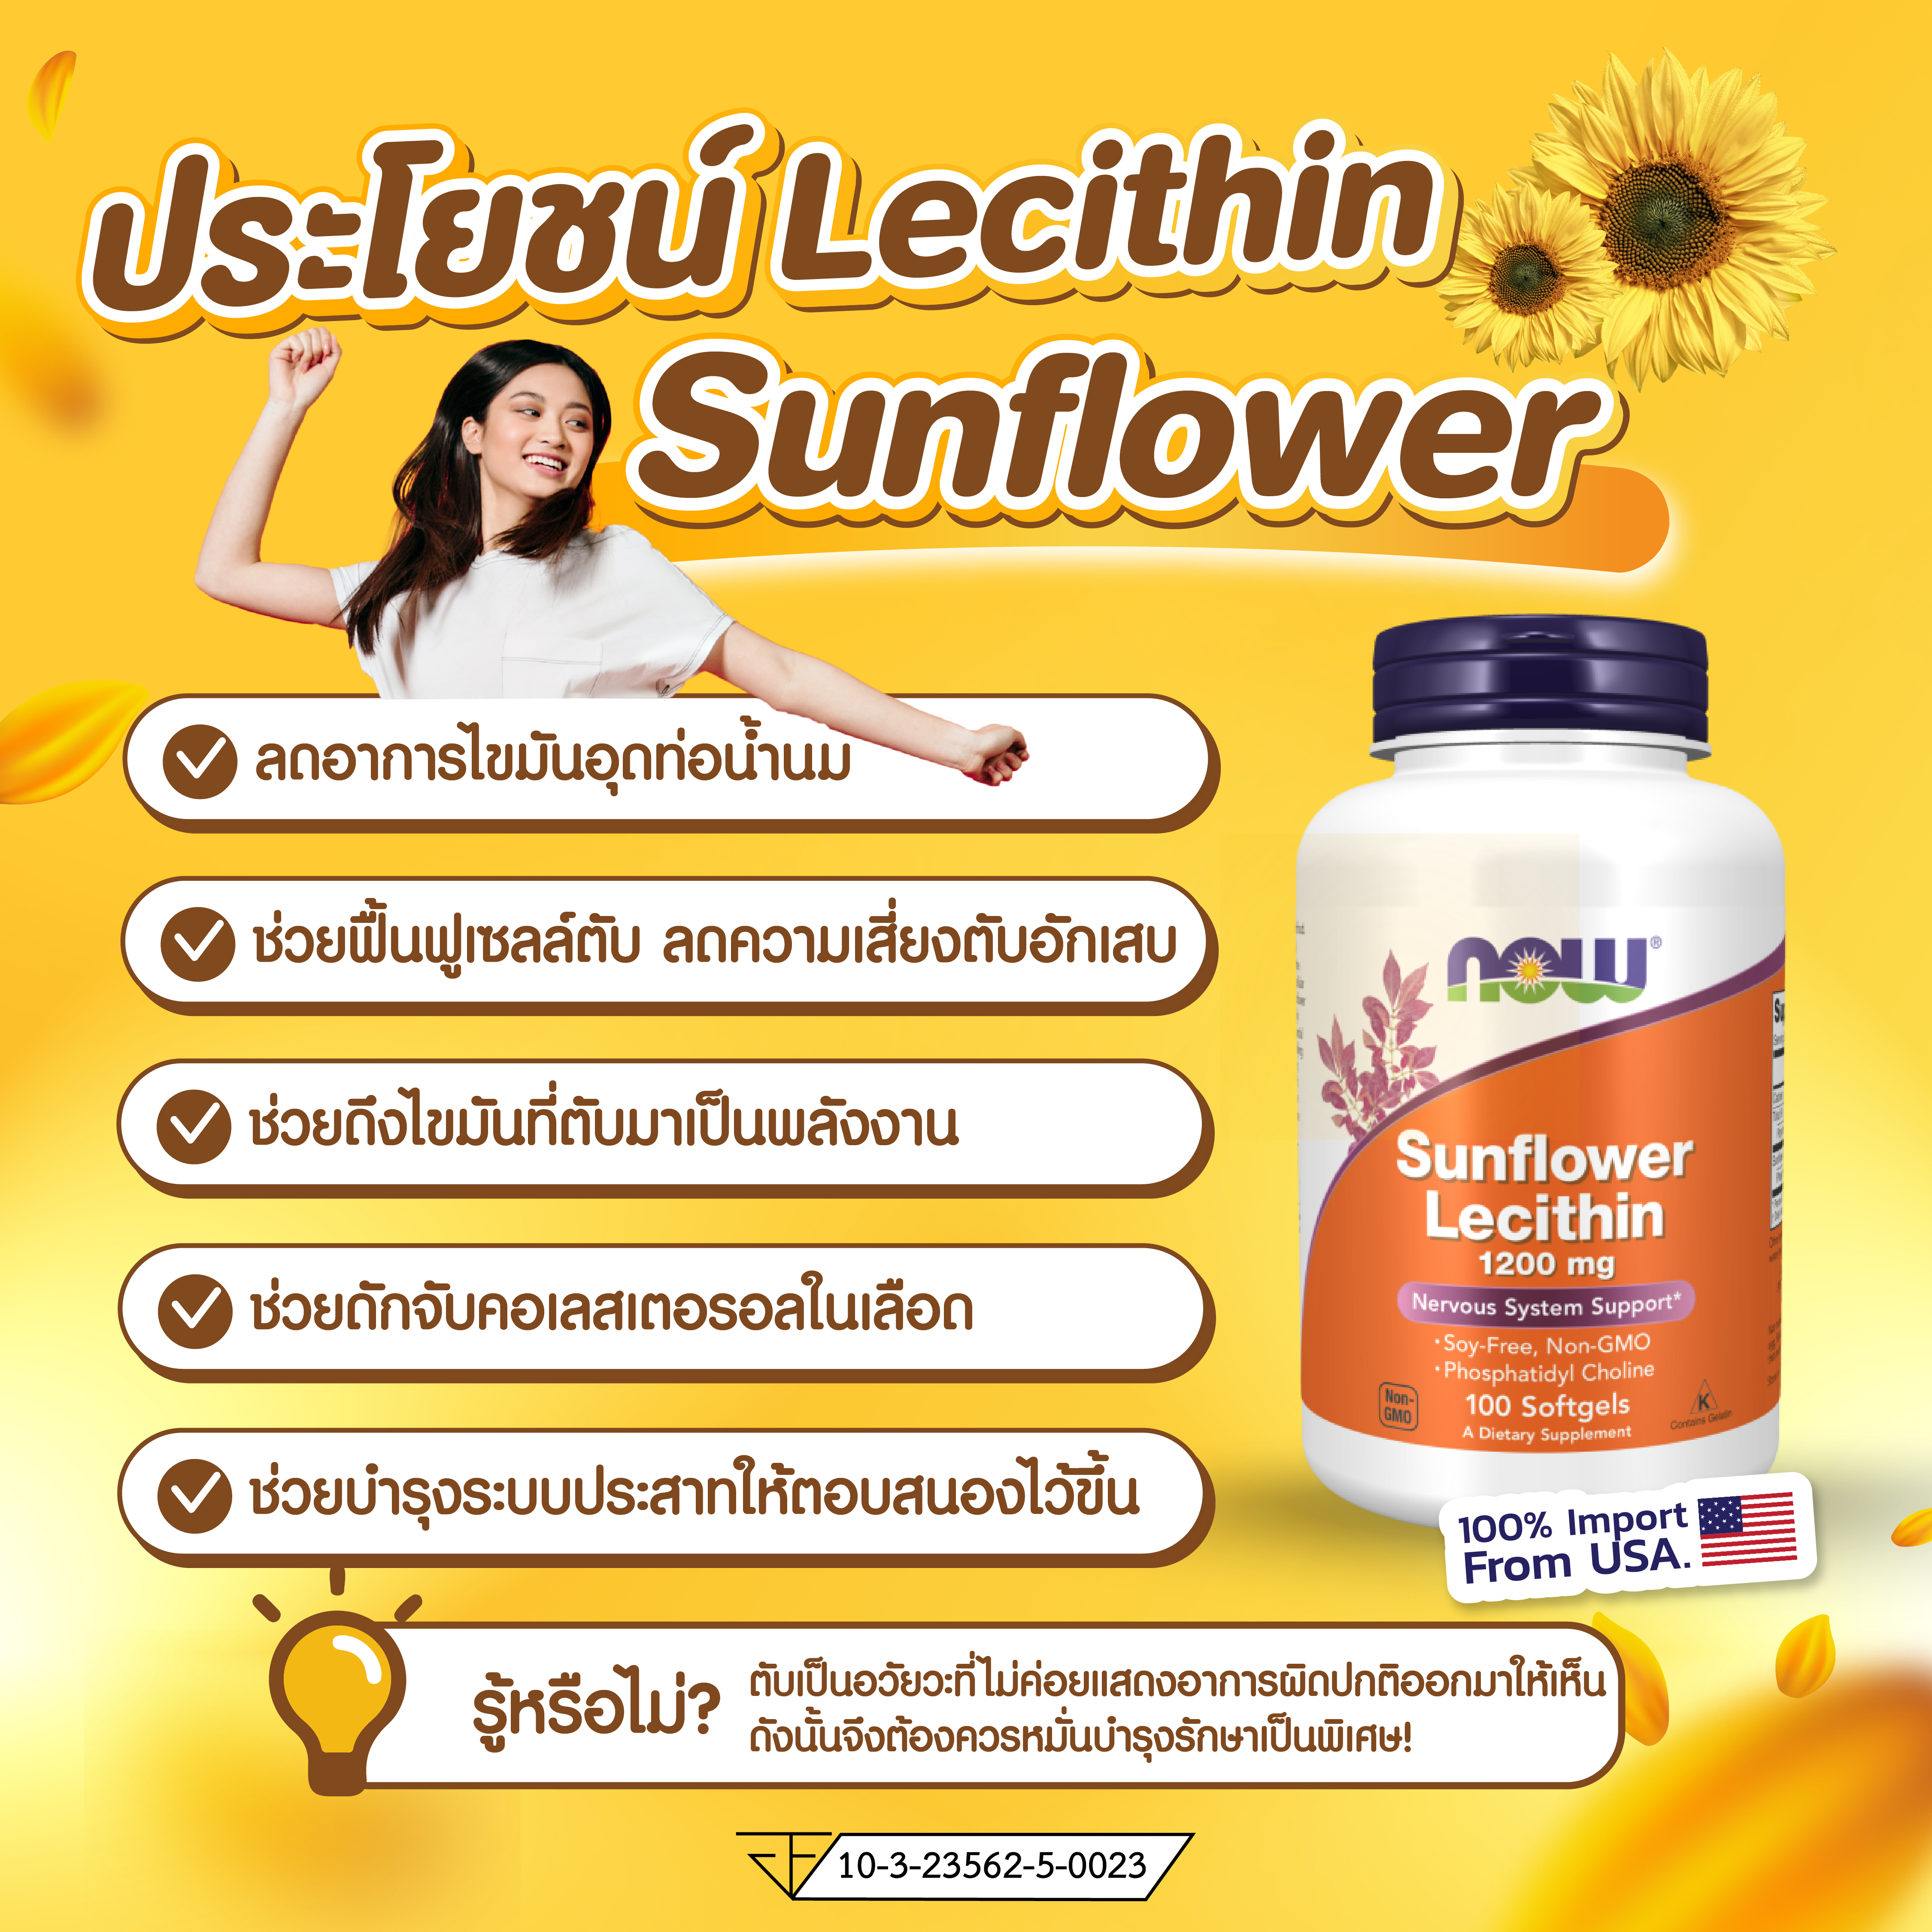 NOW Sunflower Lecithin 1200 mg 100 Softgels